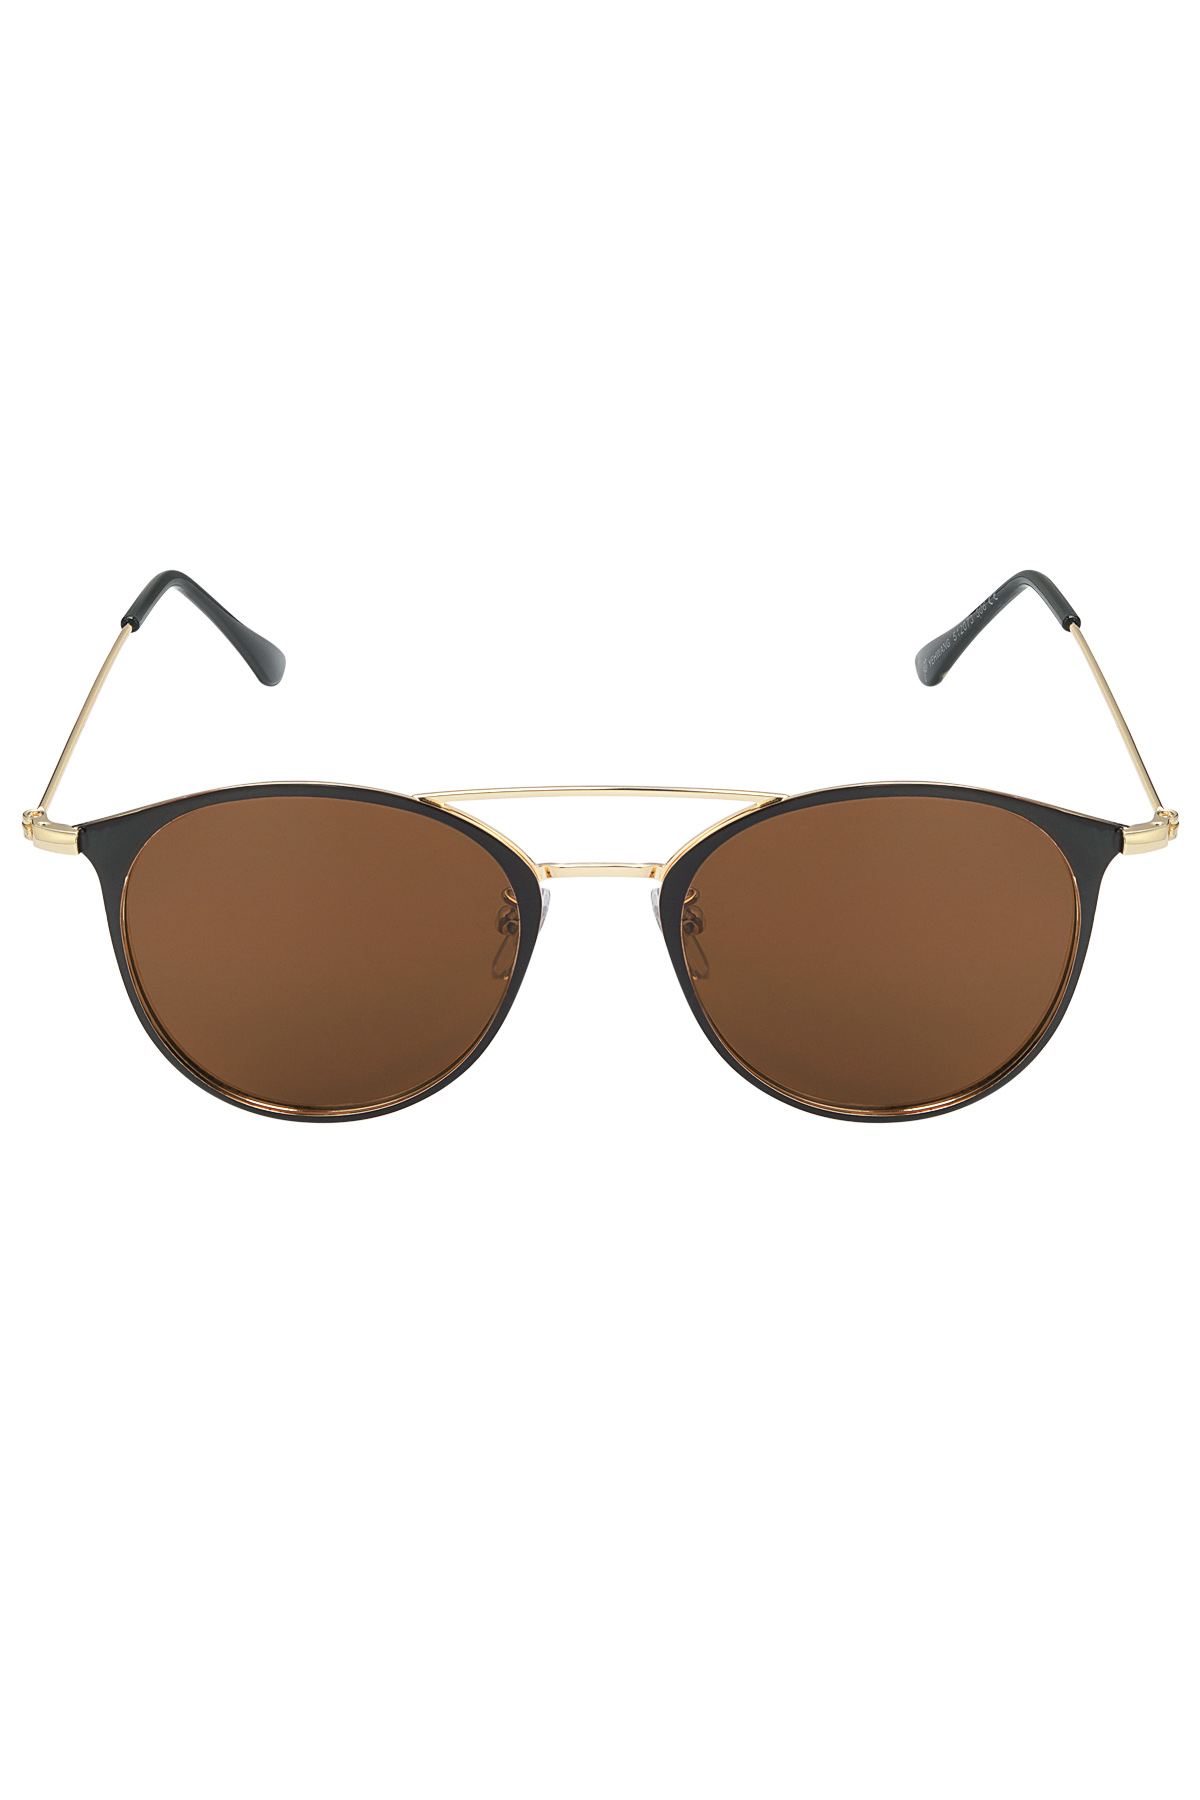 Sunglasses summer vibe - brown/black Picture5